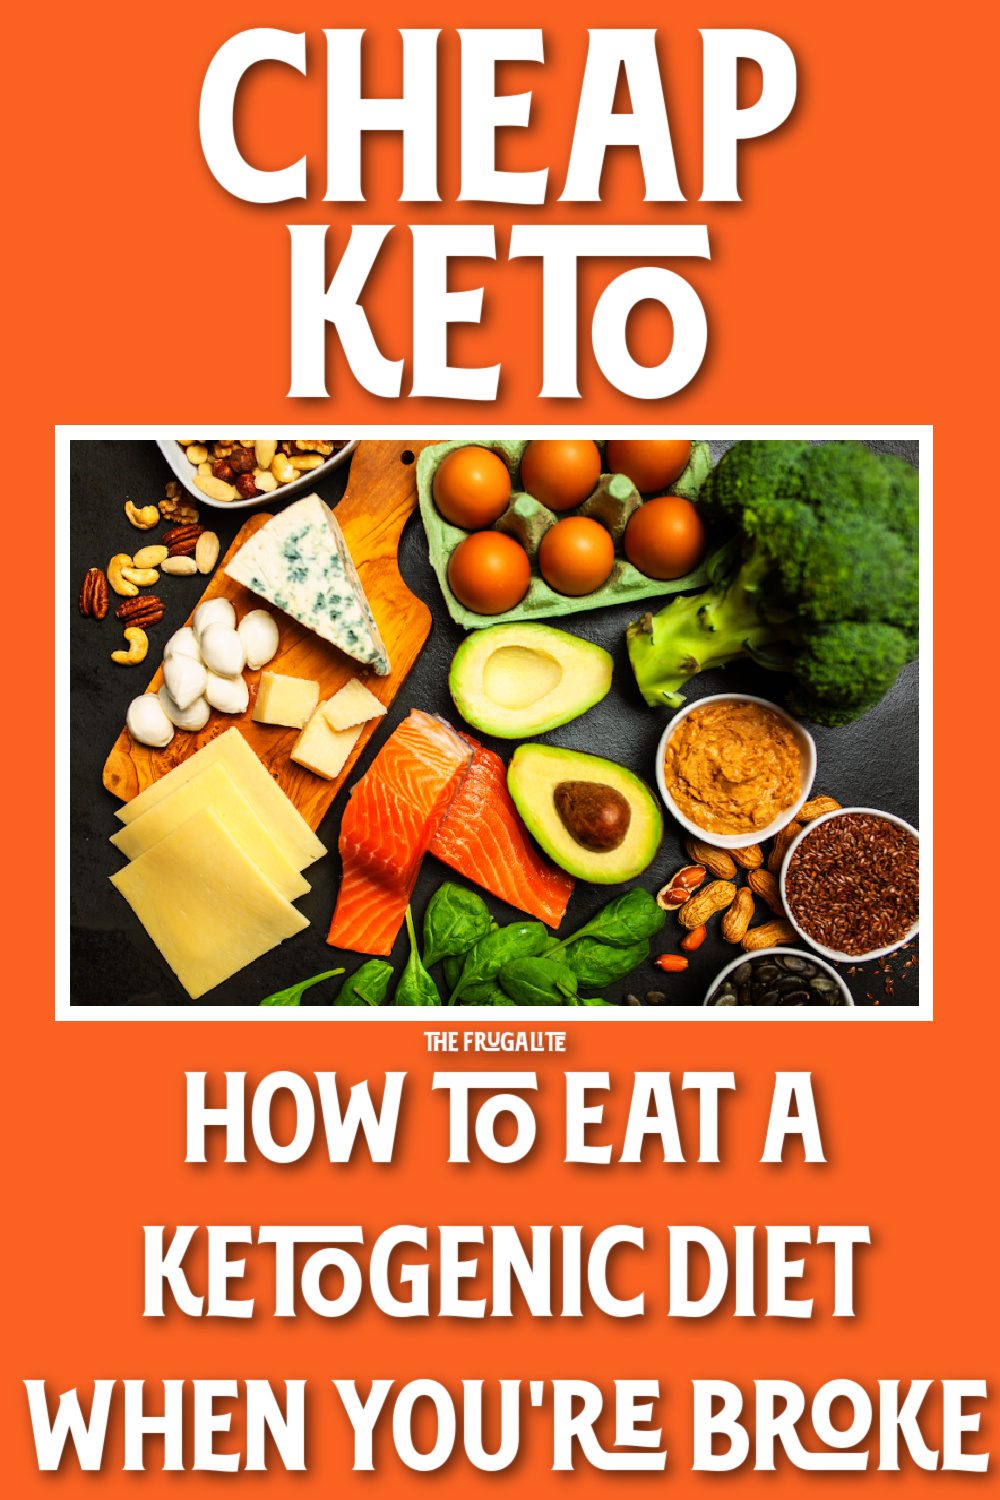 Cheap Keto: How to Eat a Ketogenic Diet When You're Broke - The Frugalite